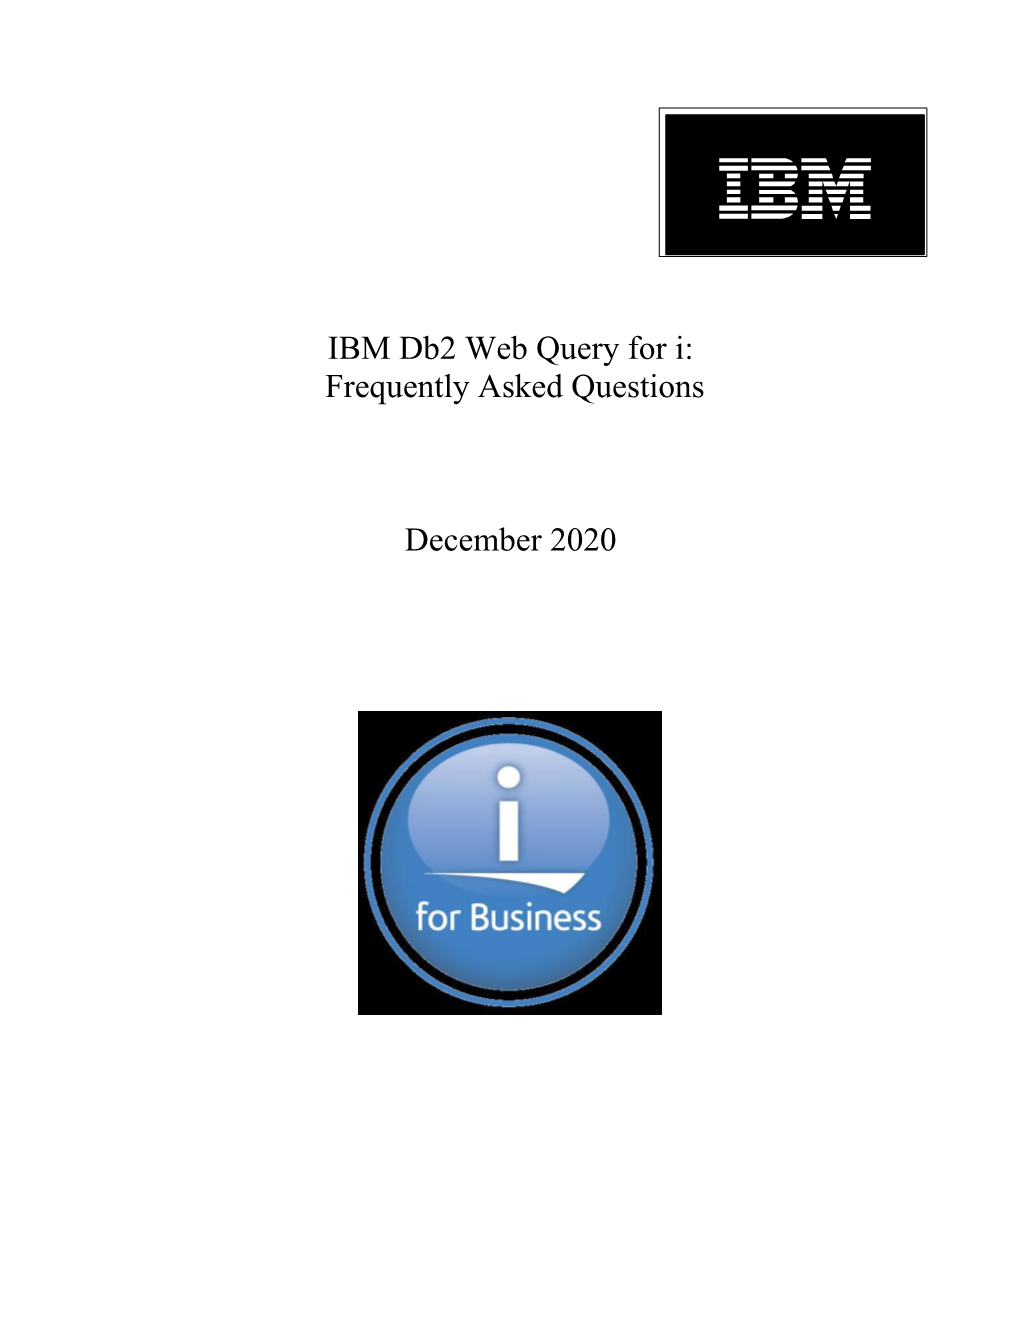 IBM Db2 Web Query for I: Frequently Asked Questions December 2020